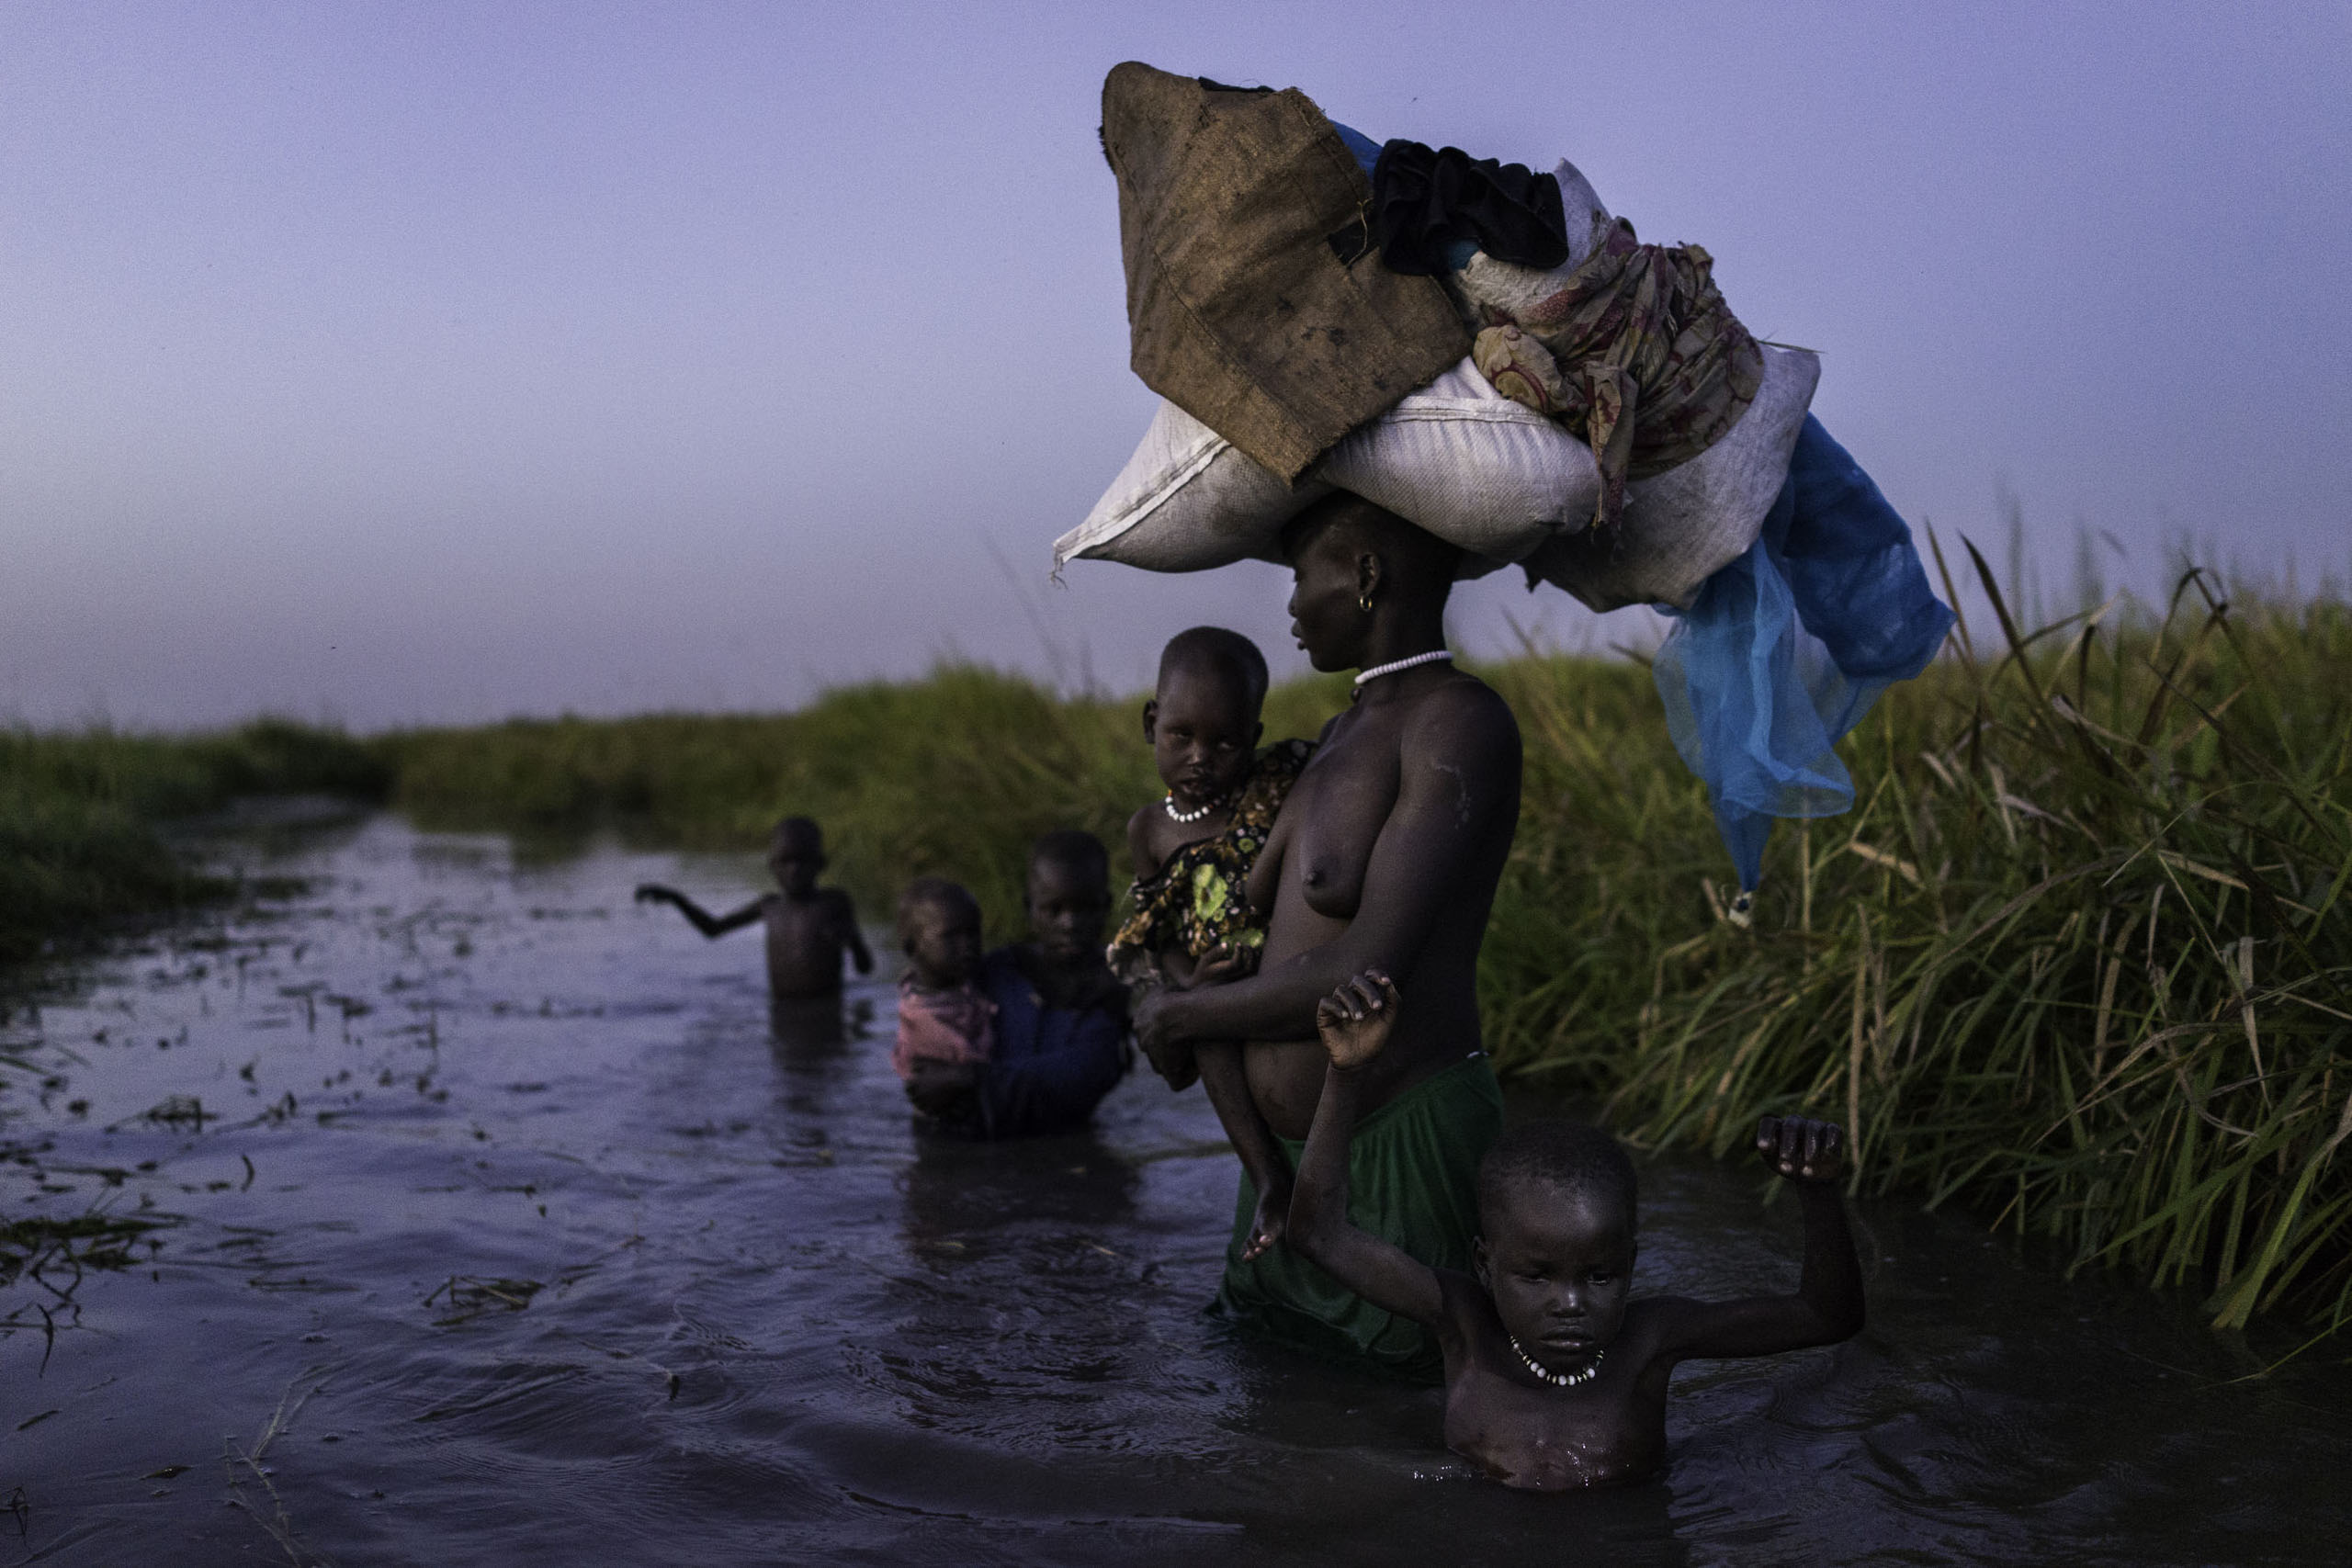 After receiving food at a distribution site, a woman and her five children walk through the cold swamps at dusk to her hiding place on Kok Island, Unity State, South Sudan.